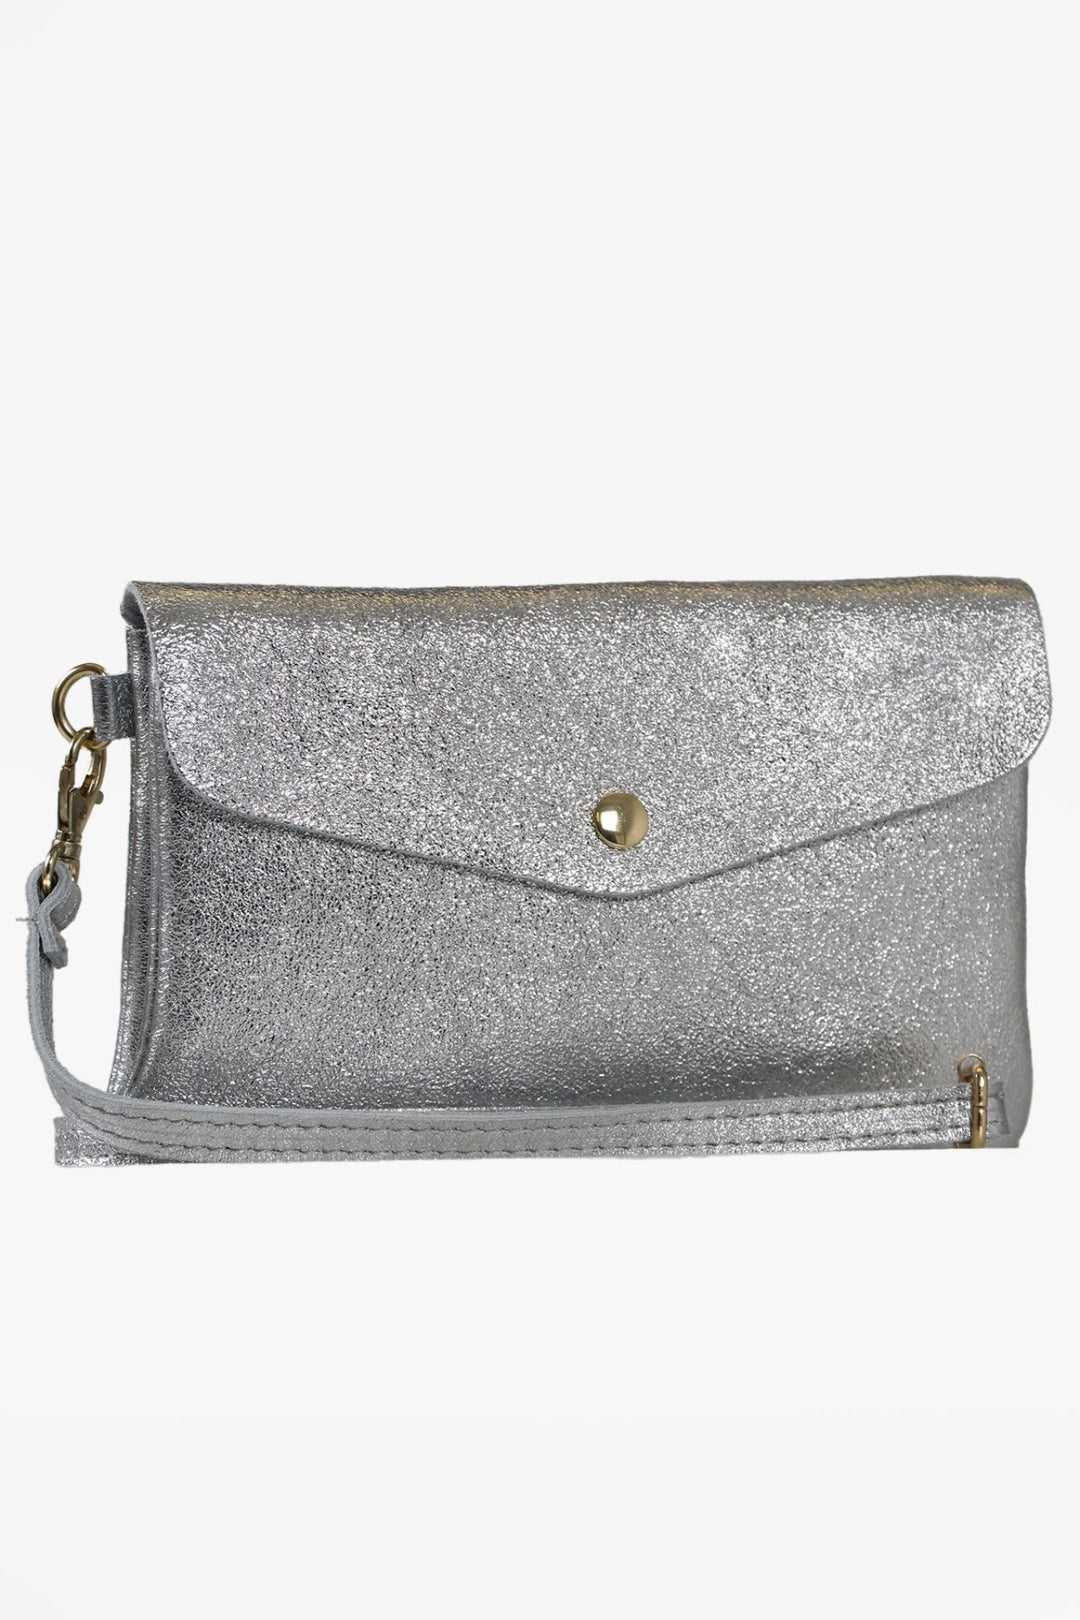 Silver Large Genuine Italian Leather Envelope Clutch